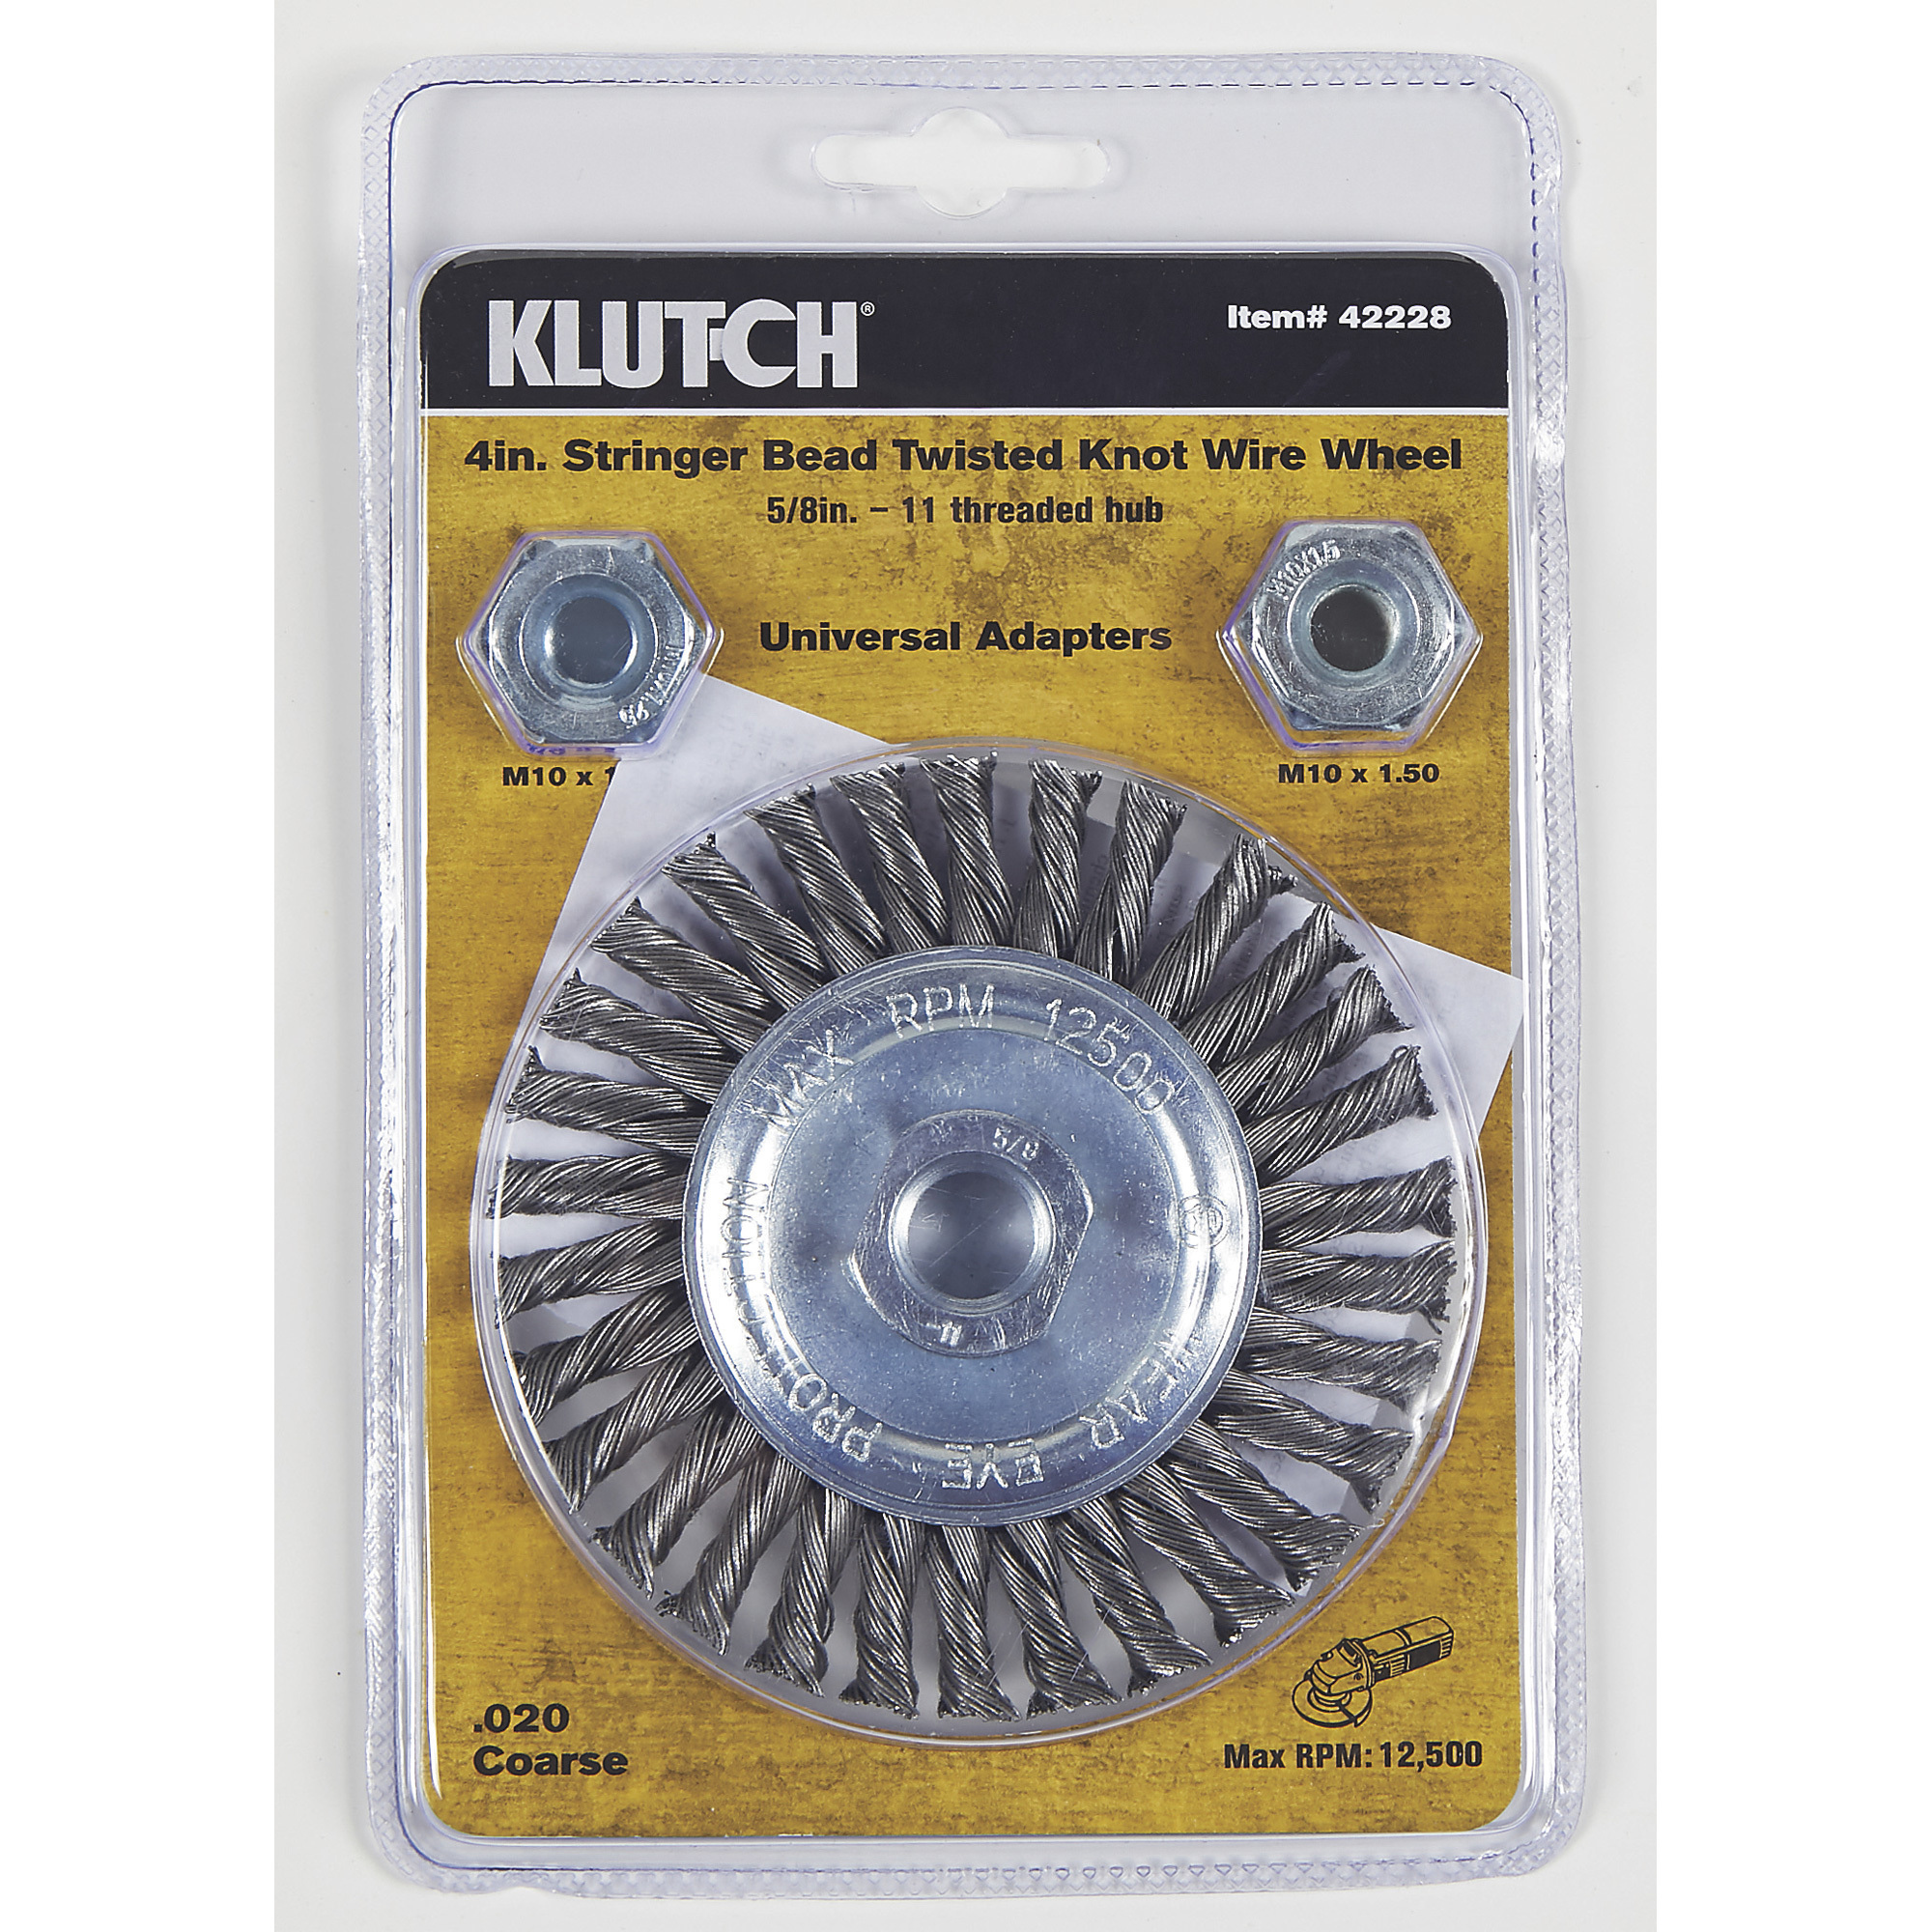 Klutch 4Inch Stringer Bead Twisted Knot Wire Wheel